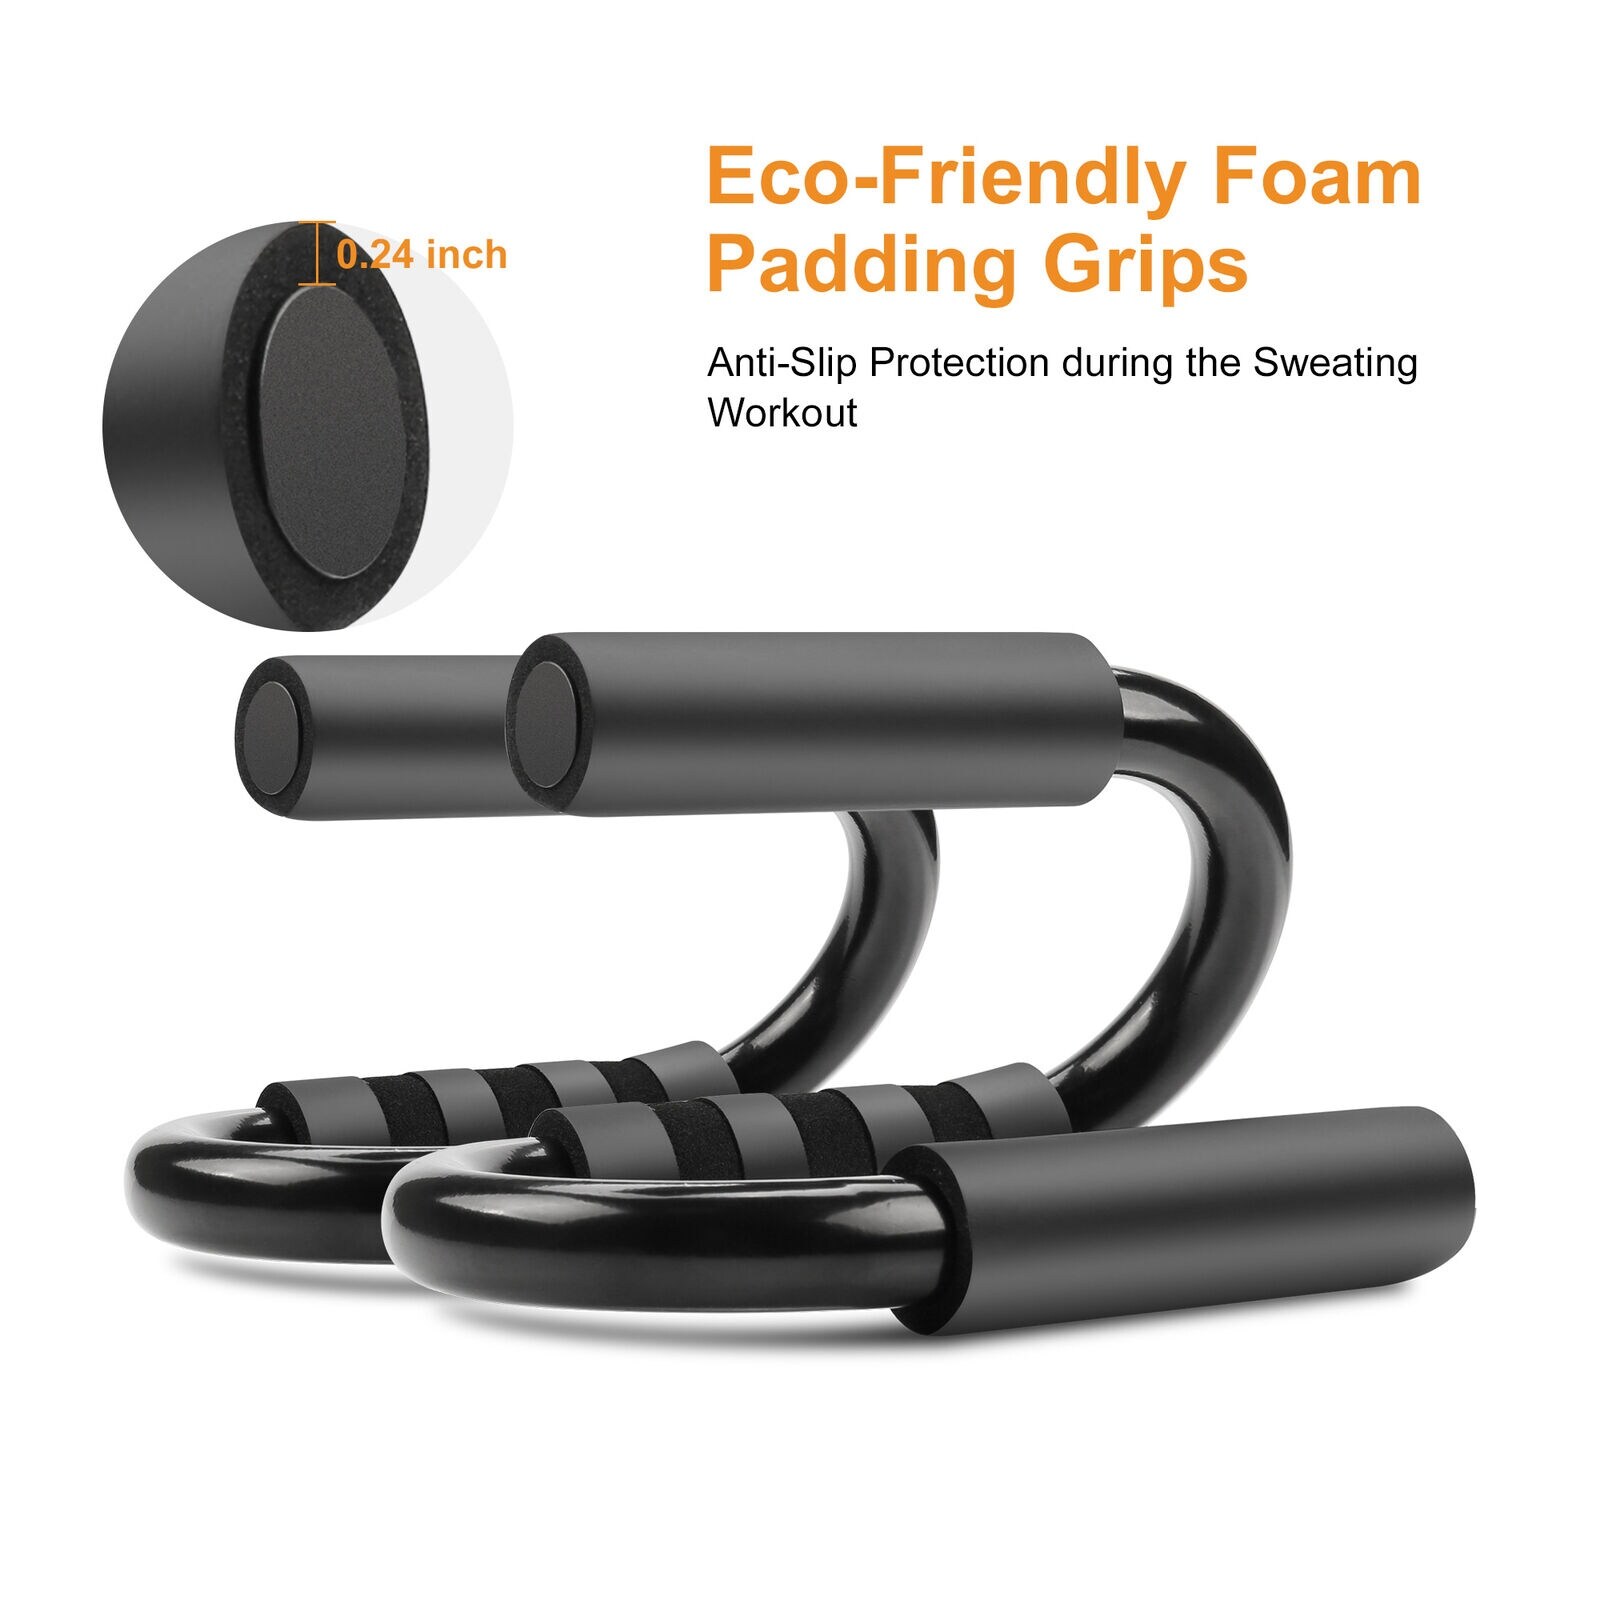 Details about   Wooden Push Up Bars Gym Gear Equipment With Anti-Slid Mat 